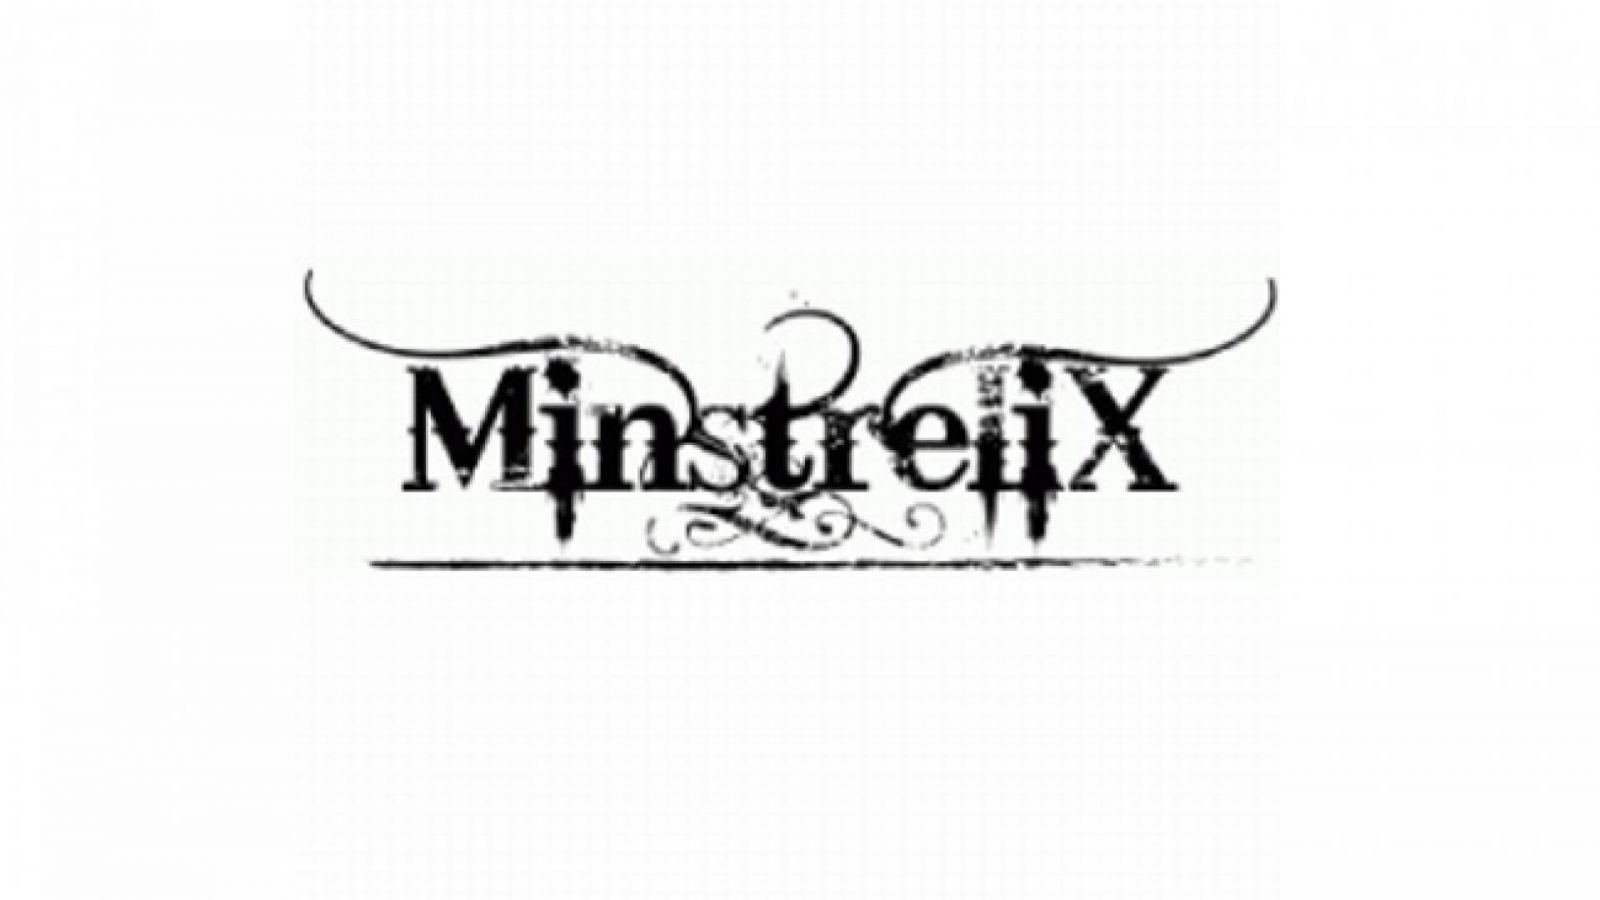 New Album from MinstreliX © MinstreliX. All rights reserved.